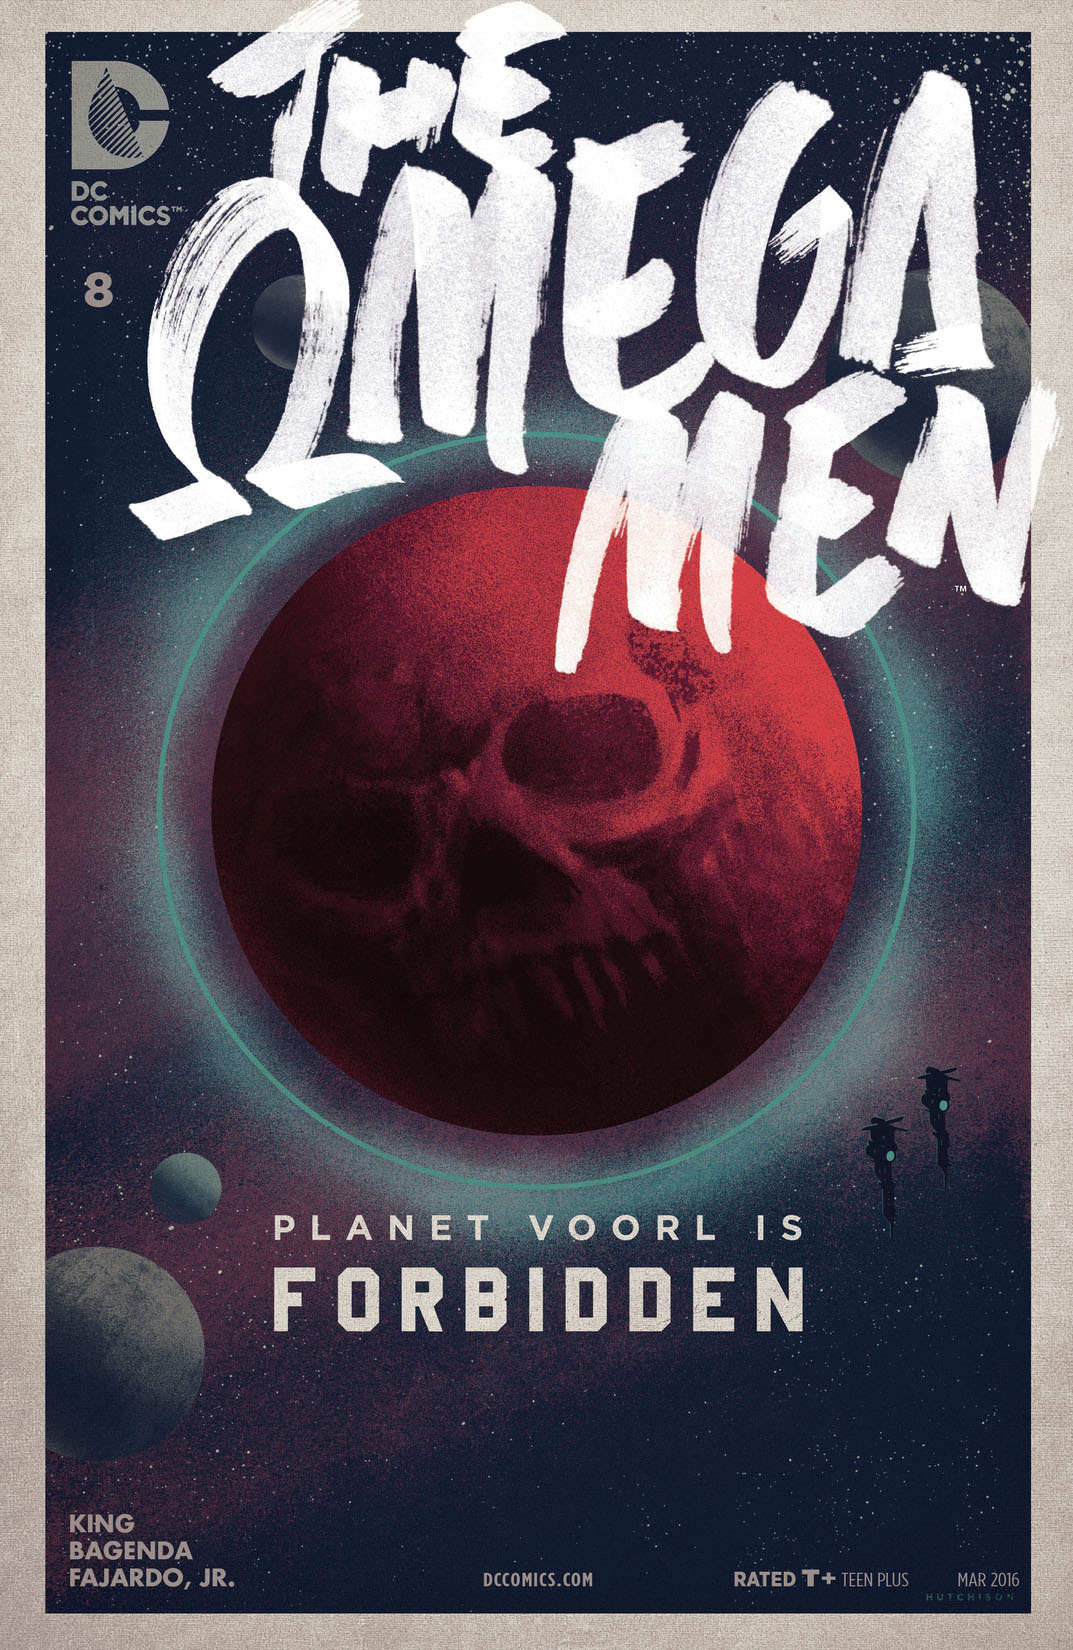 The Omega Men (2015-) #8 preview images